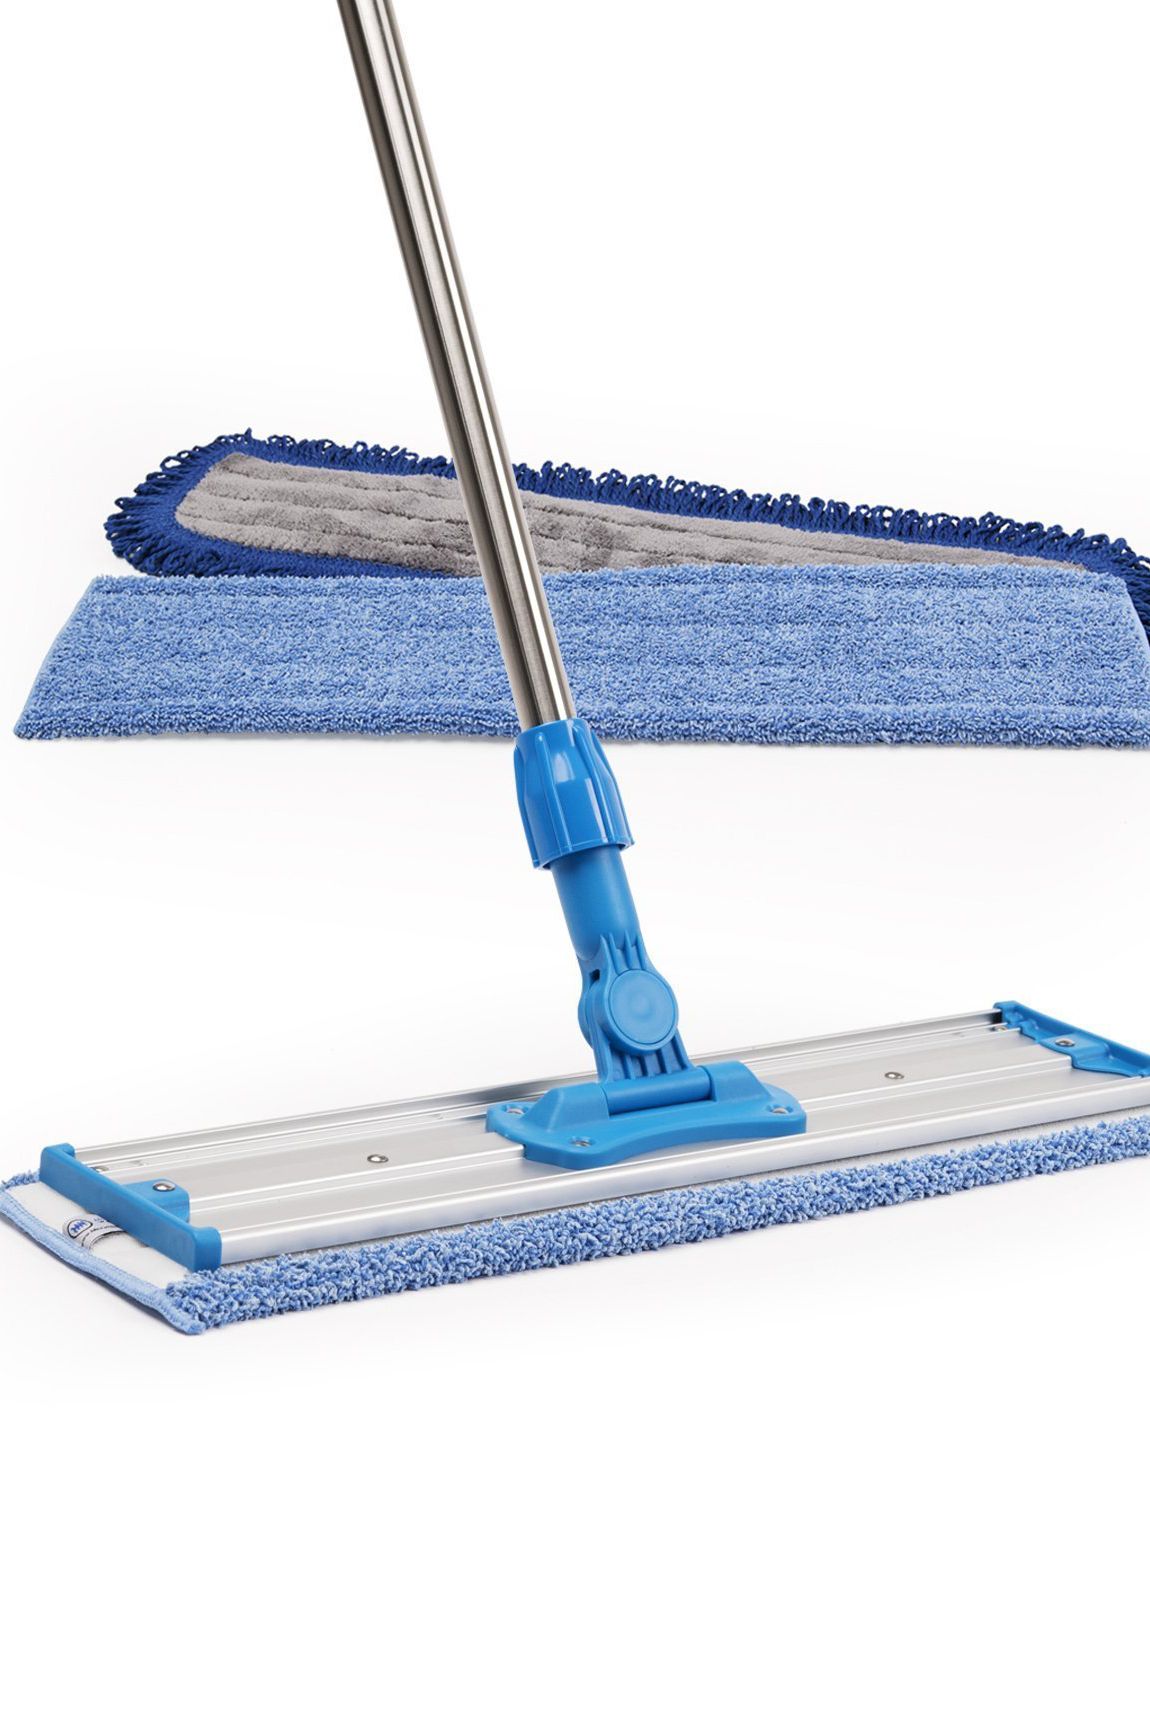 5 Best Cleaning Supplies - The Only Supplies You Need to Clean Your House